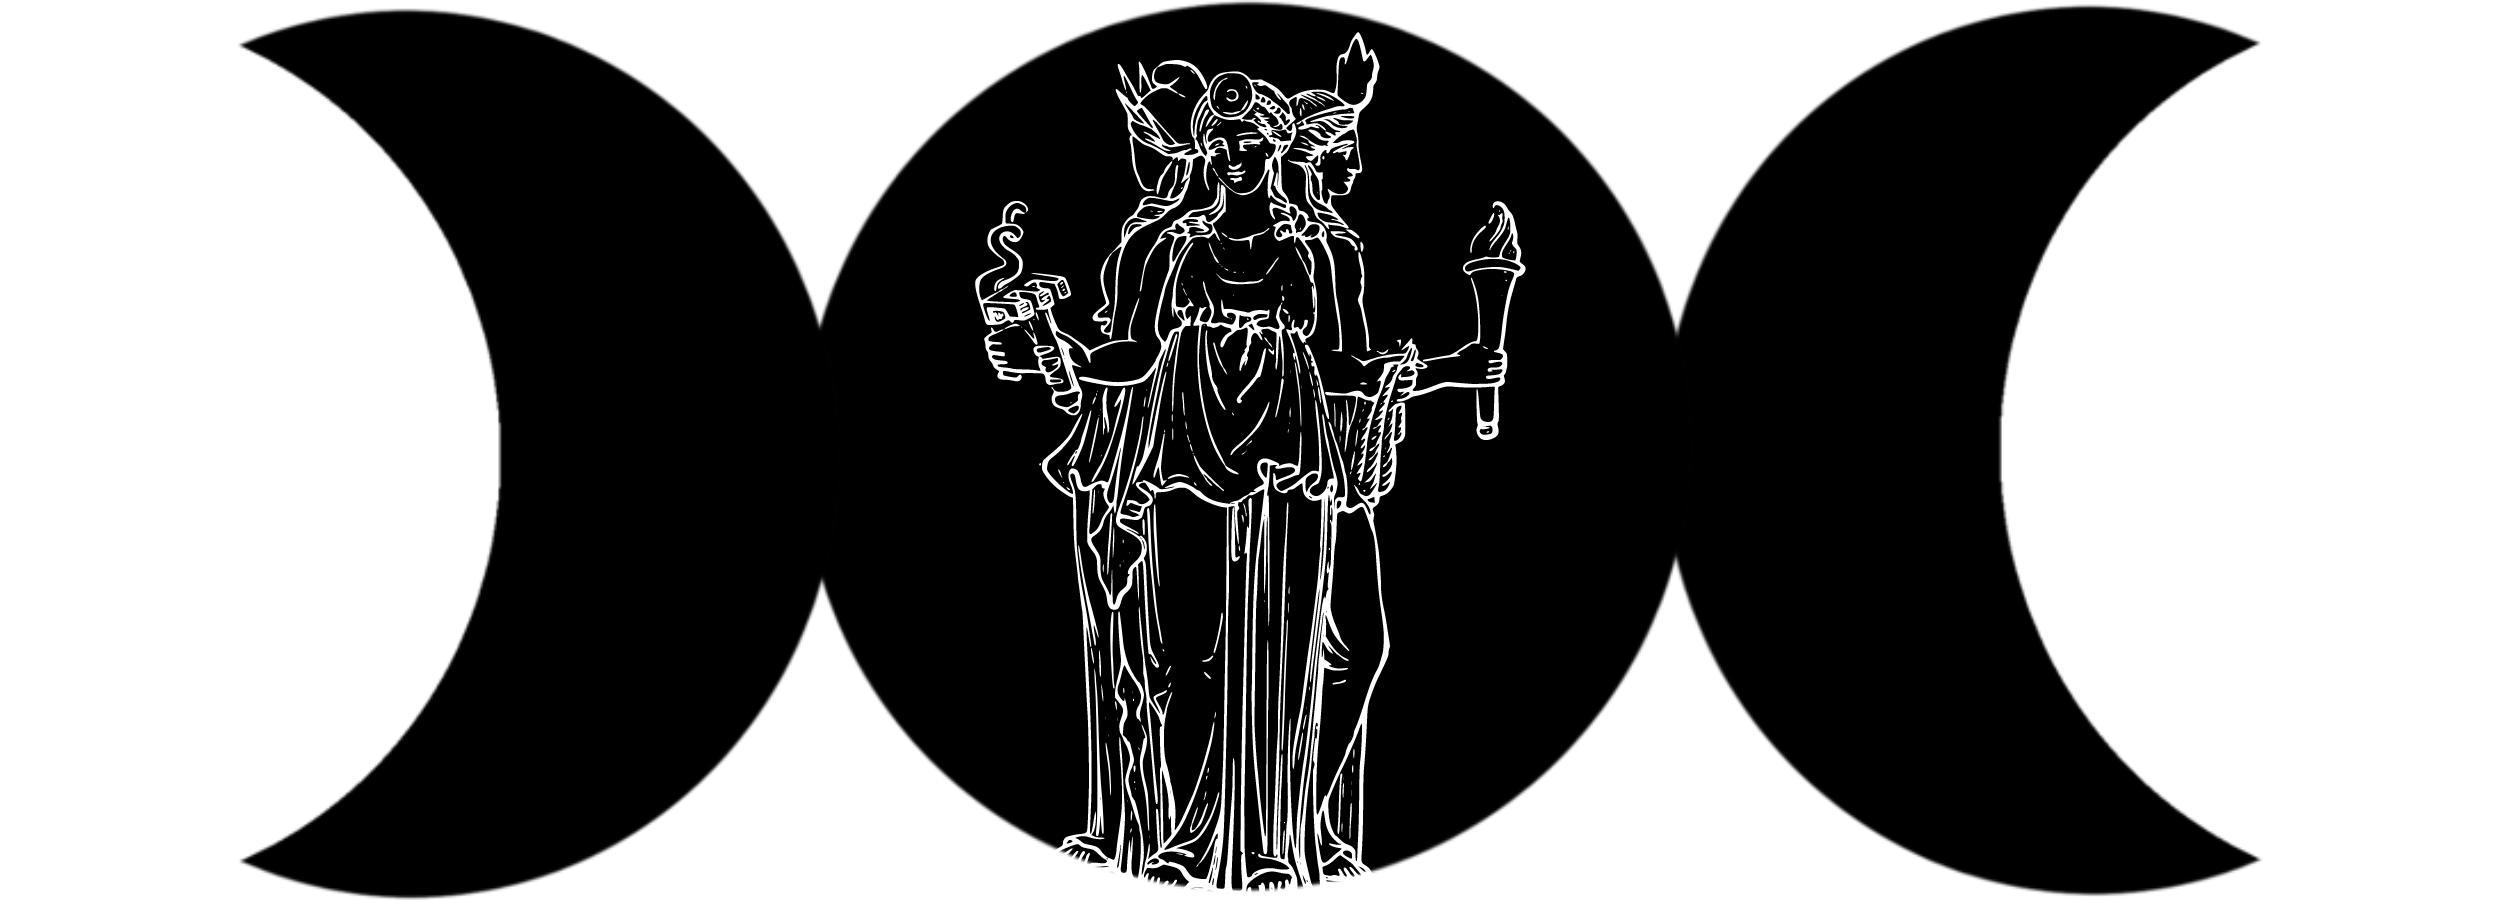 Goddess Hecate in the triple moon